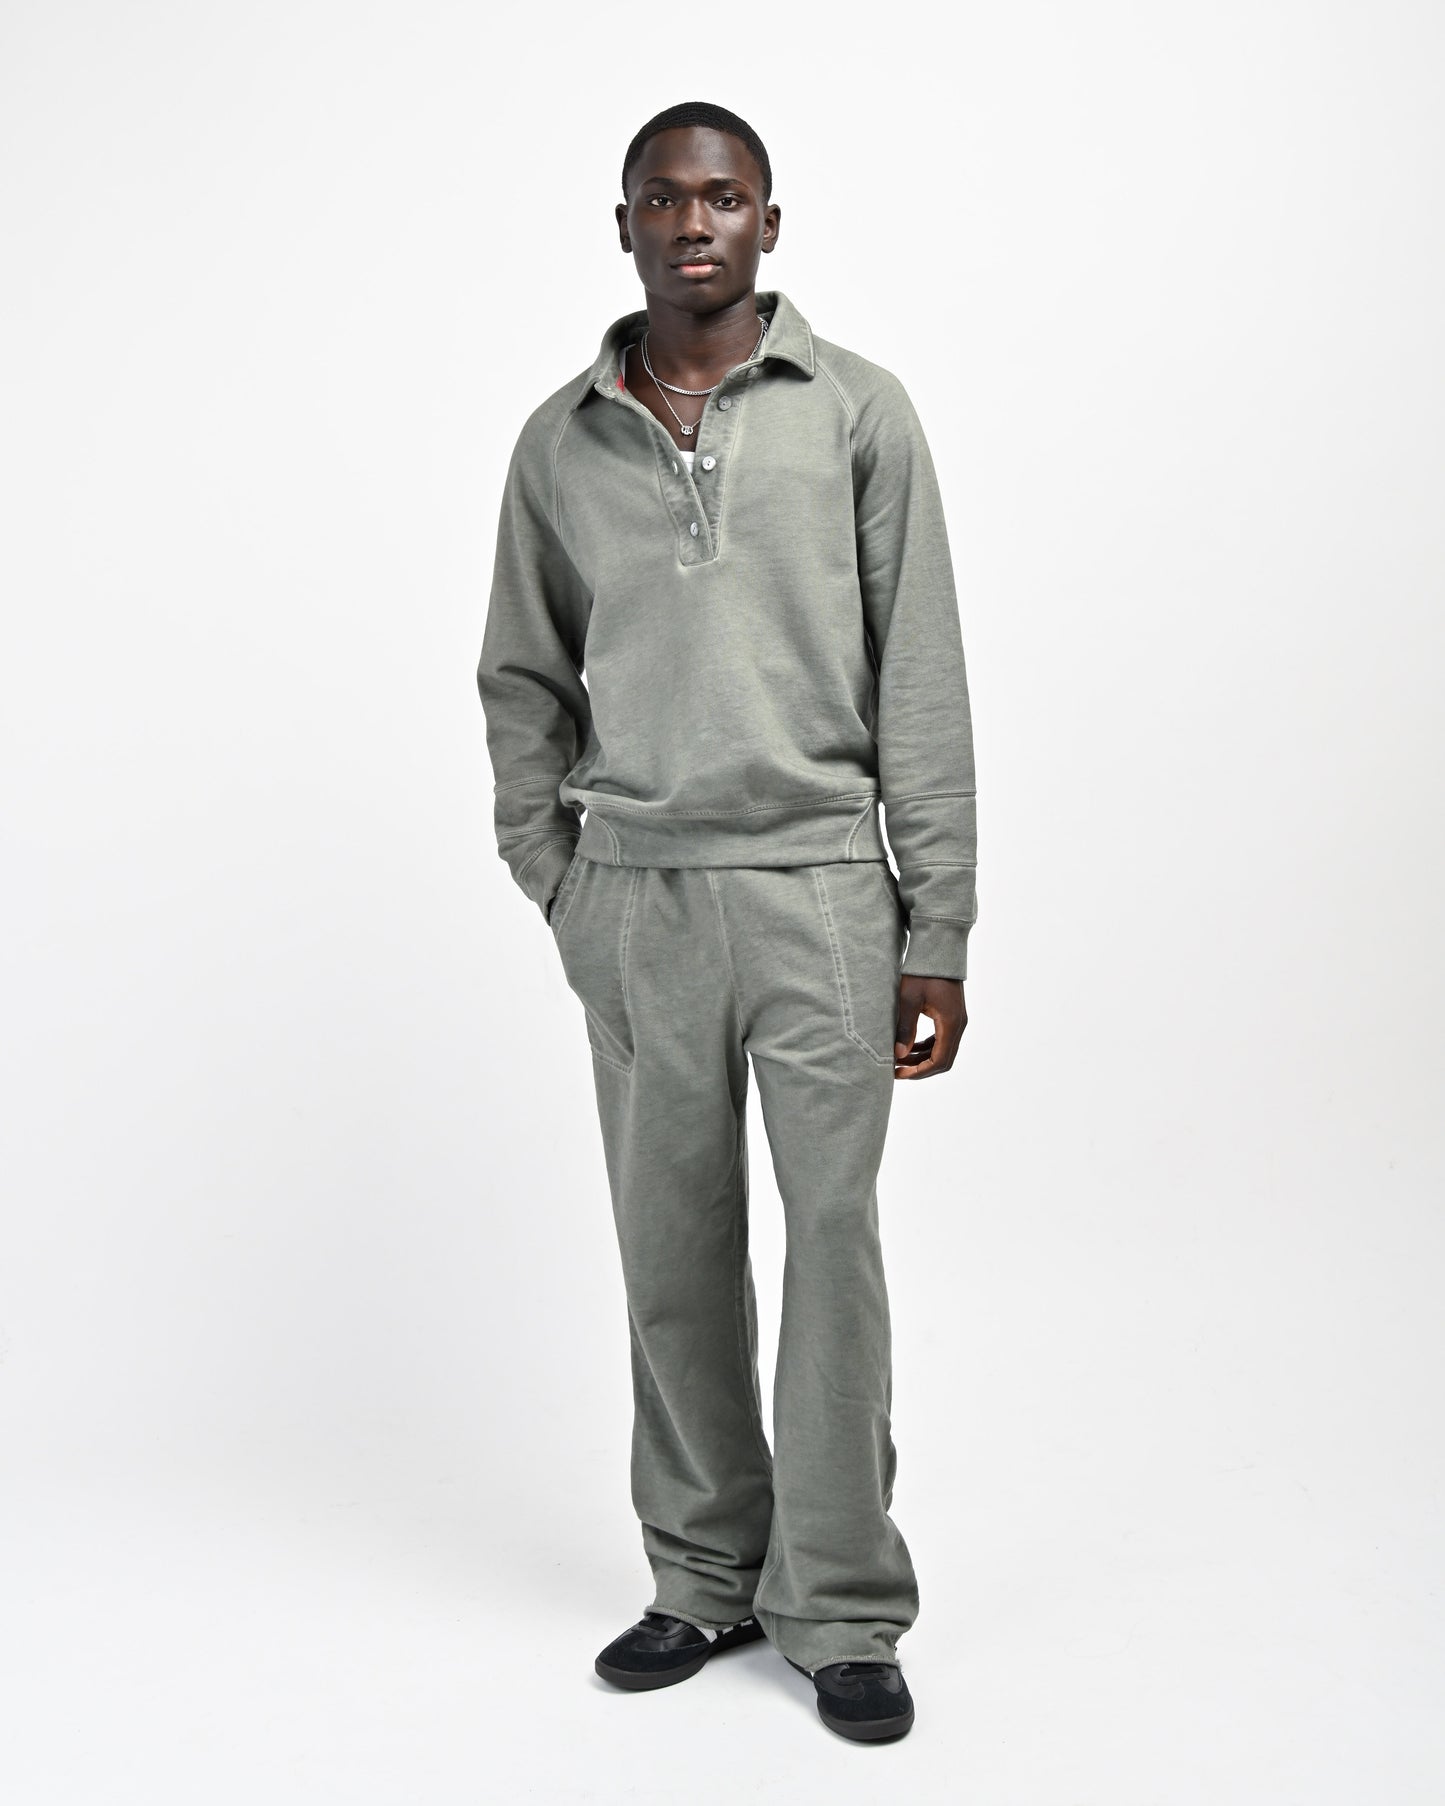 Model is wearing August Rugby Pullover Sweatshirt and Allora Track Pants by Aseye Studio